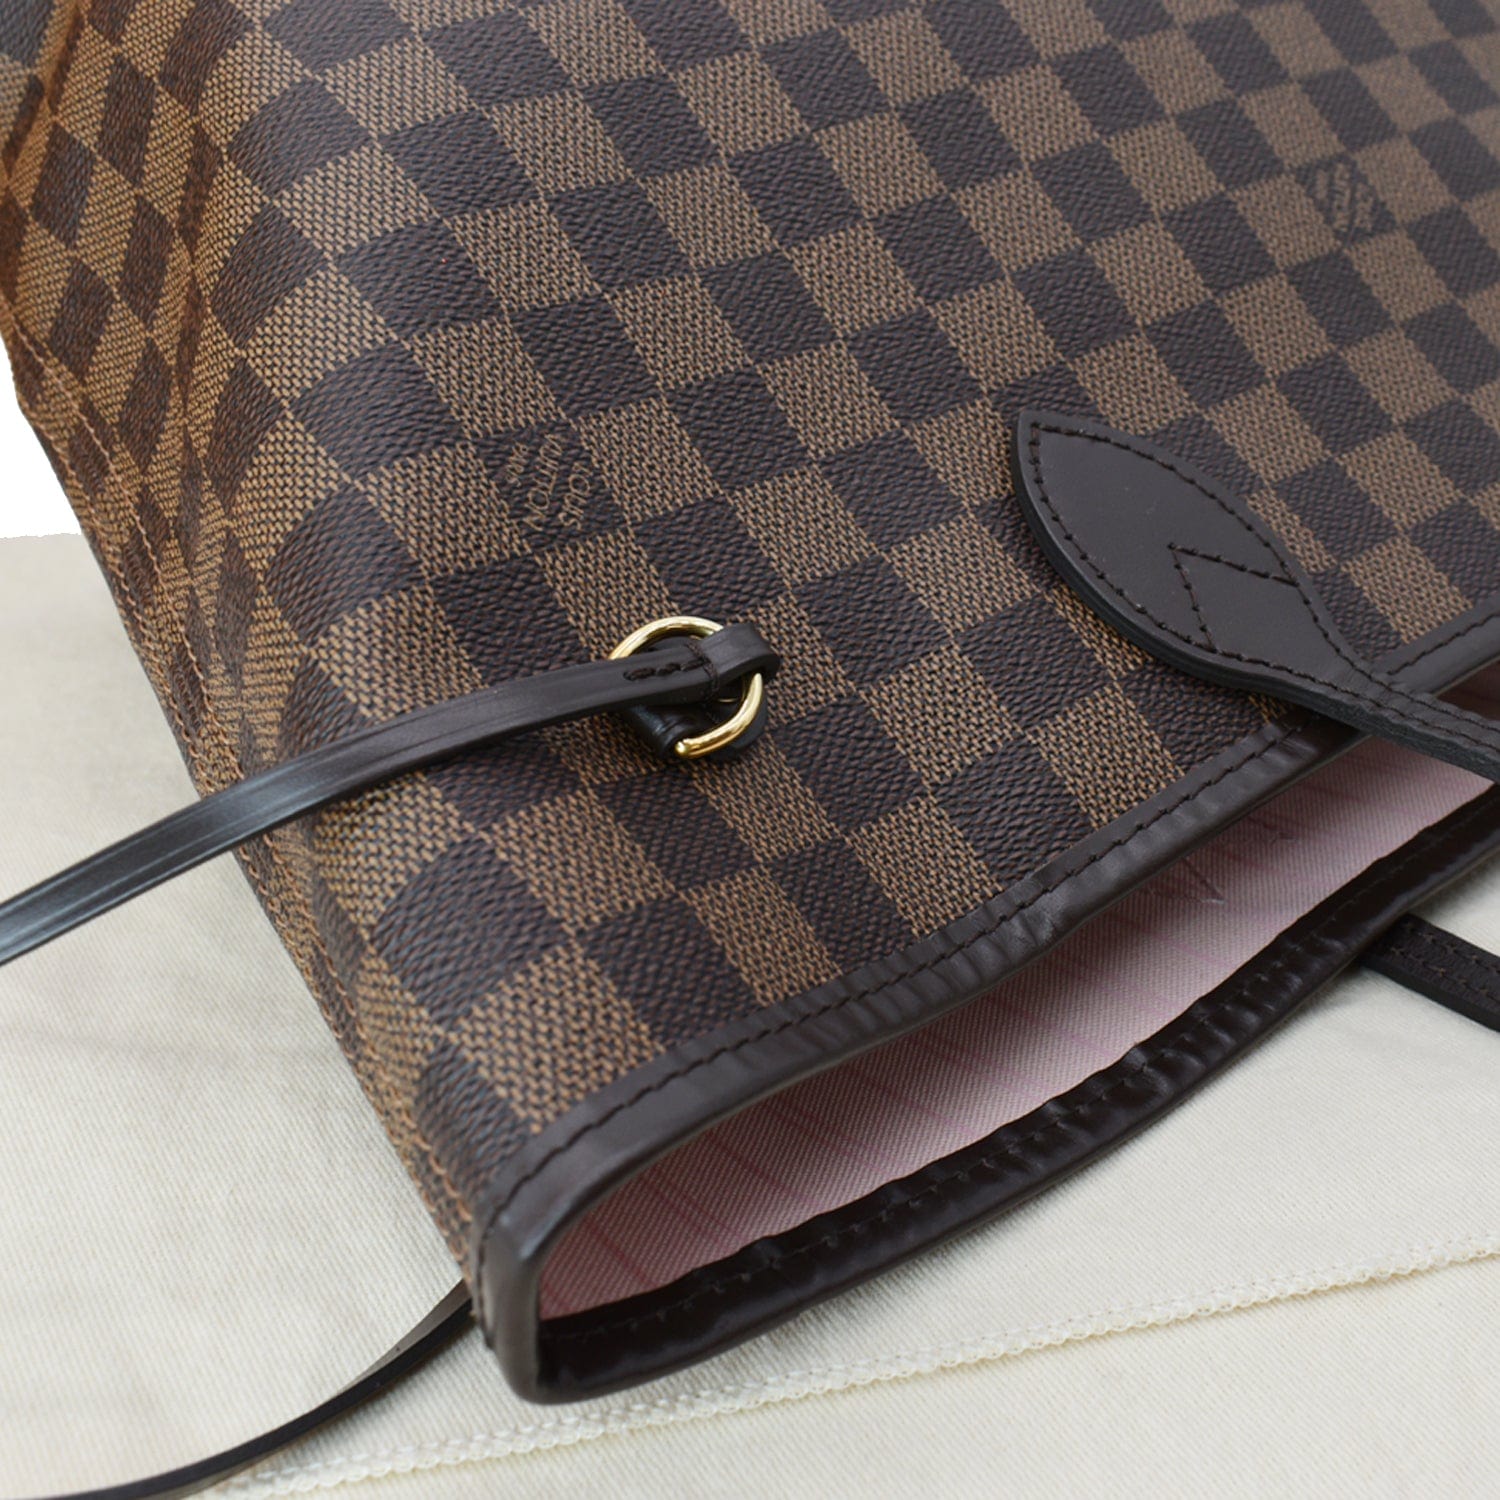 Authentic Louis Vuitton Damier Neverfull MM Tote Bag N51105 LV